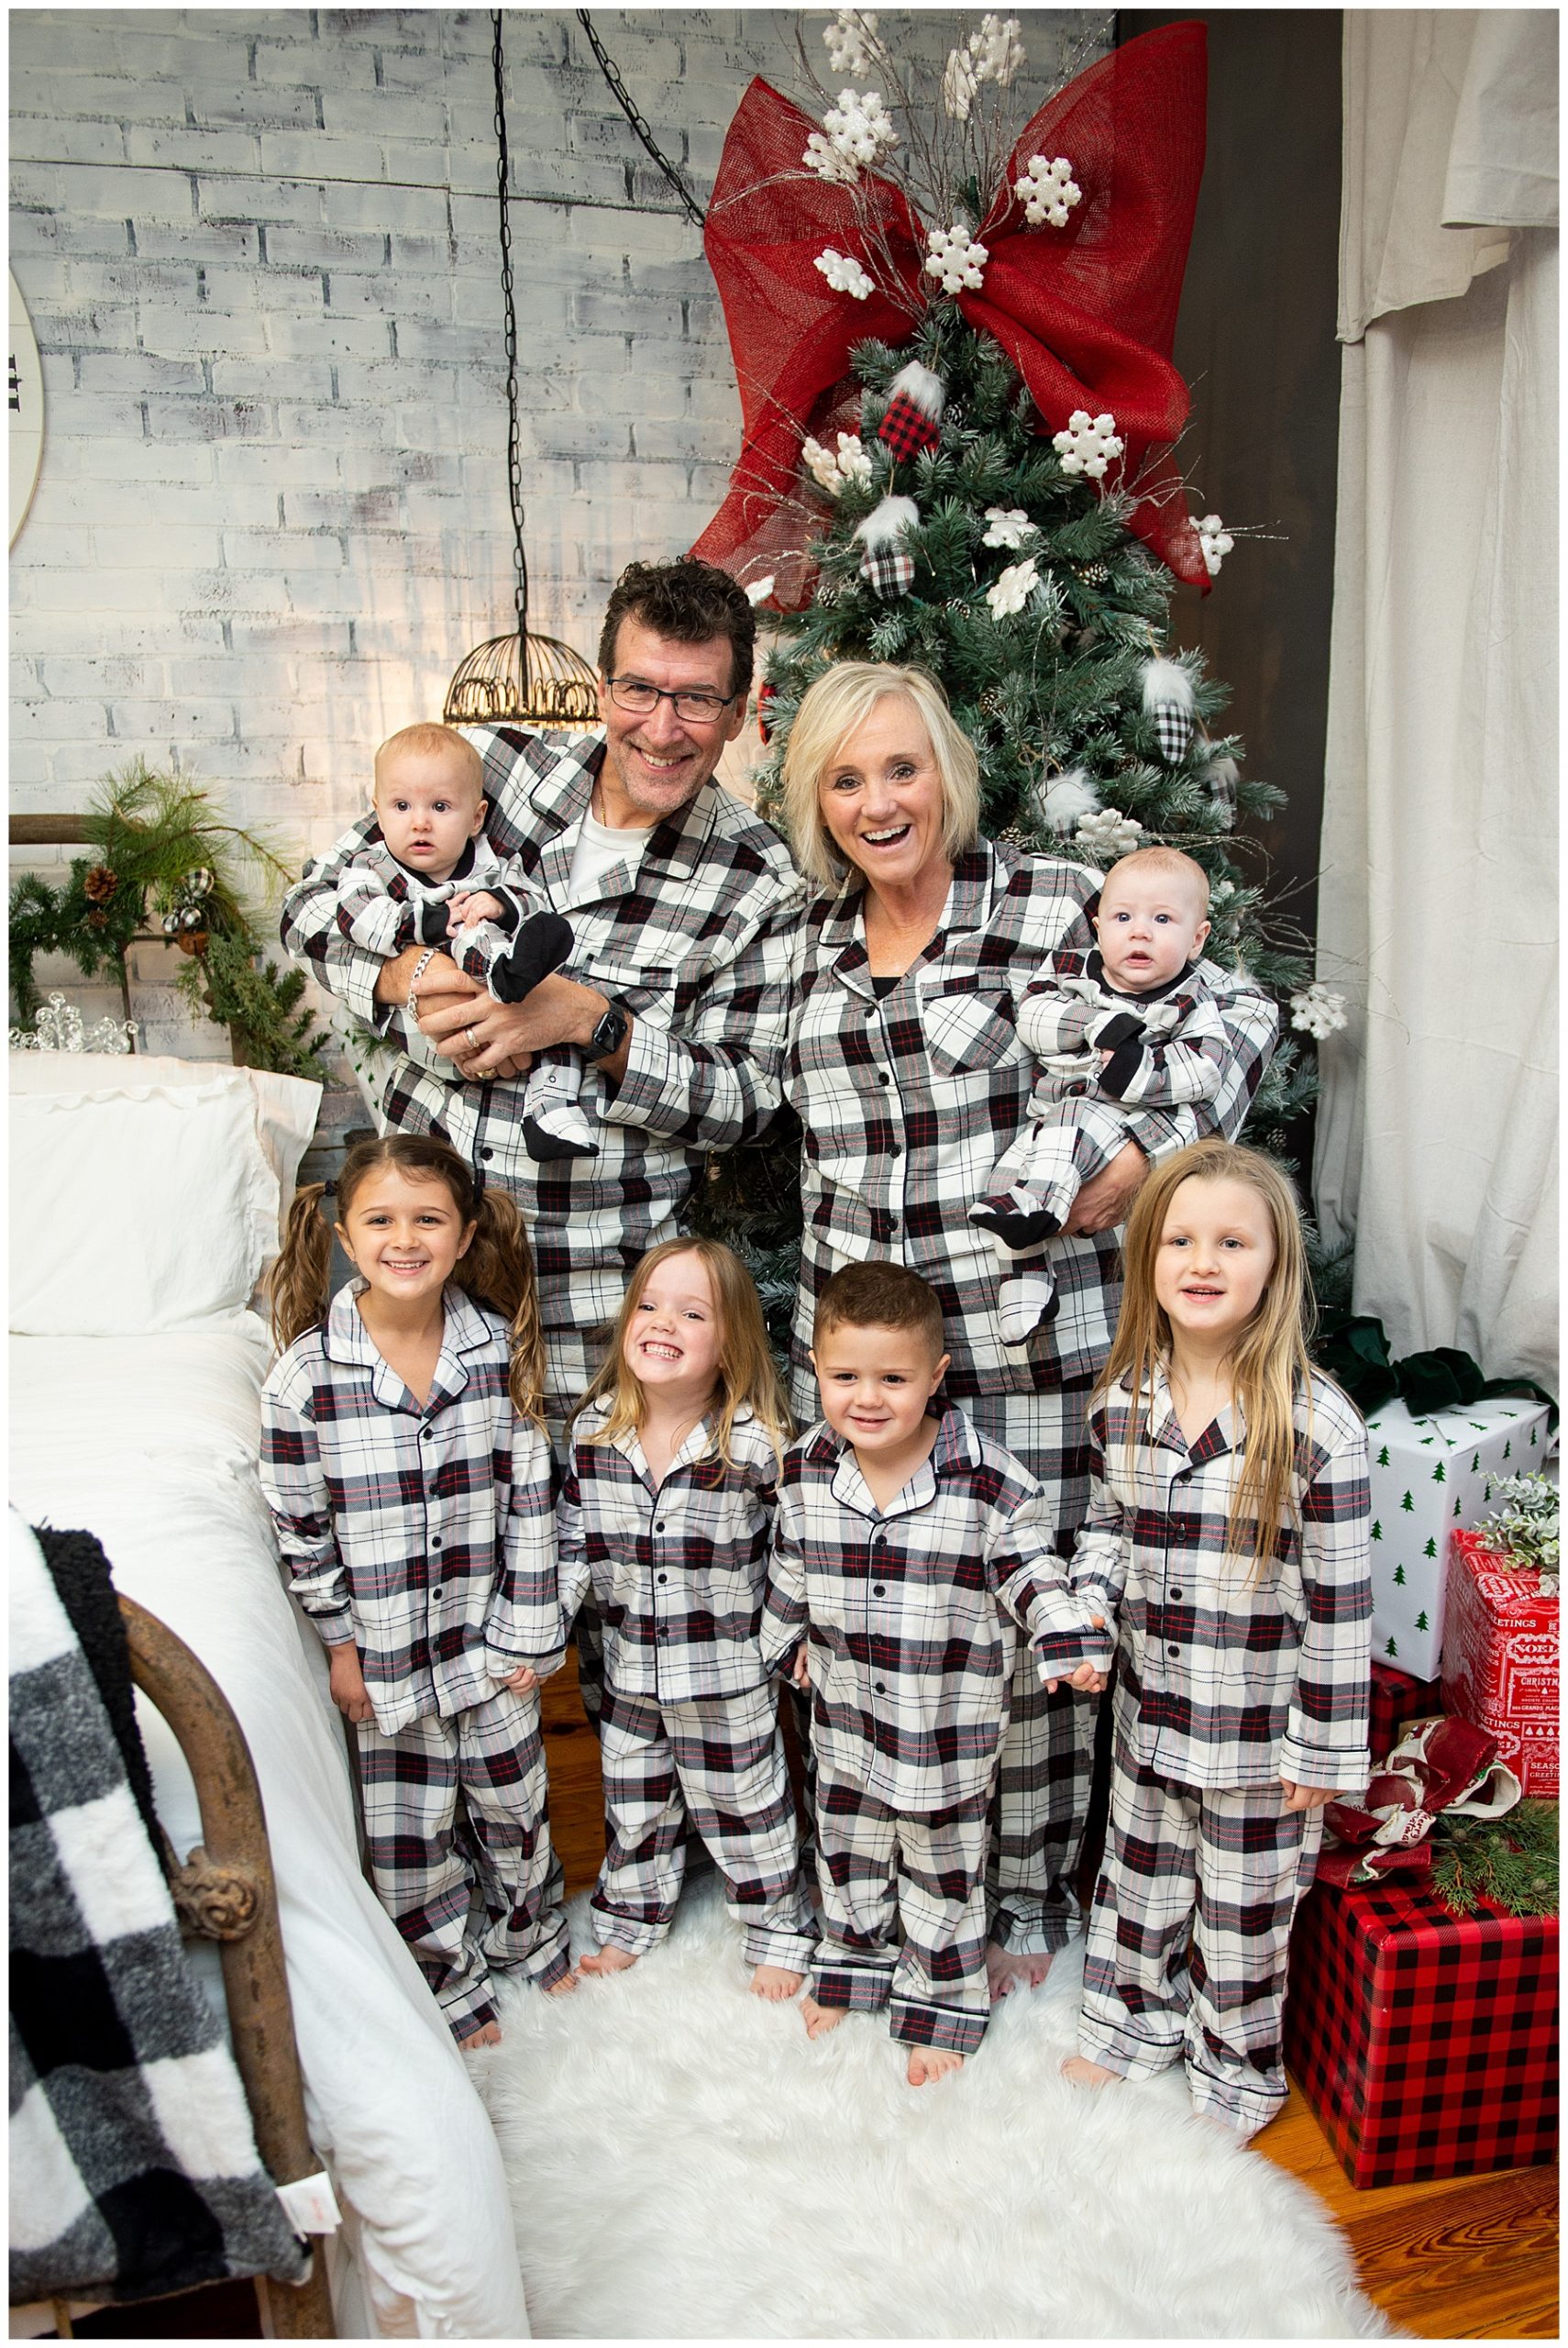 Chris Stephens, wife and grandchildren posing in front of Christmas tree in Nashville TN